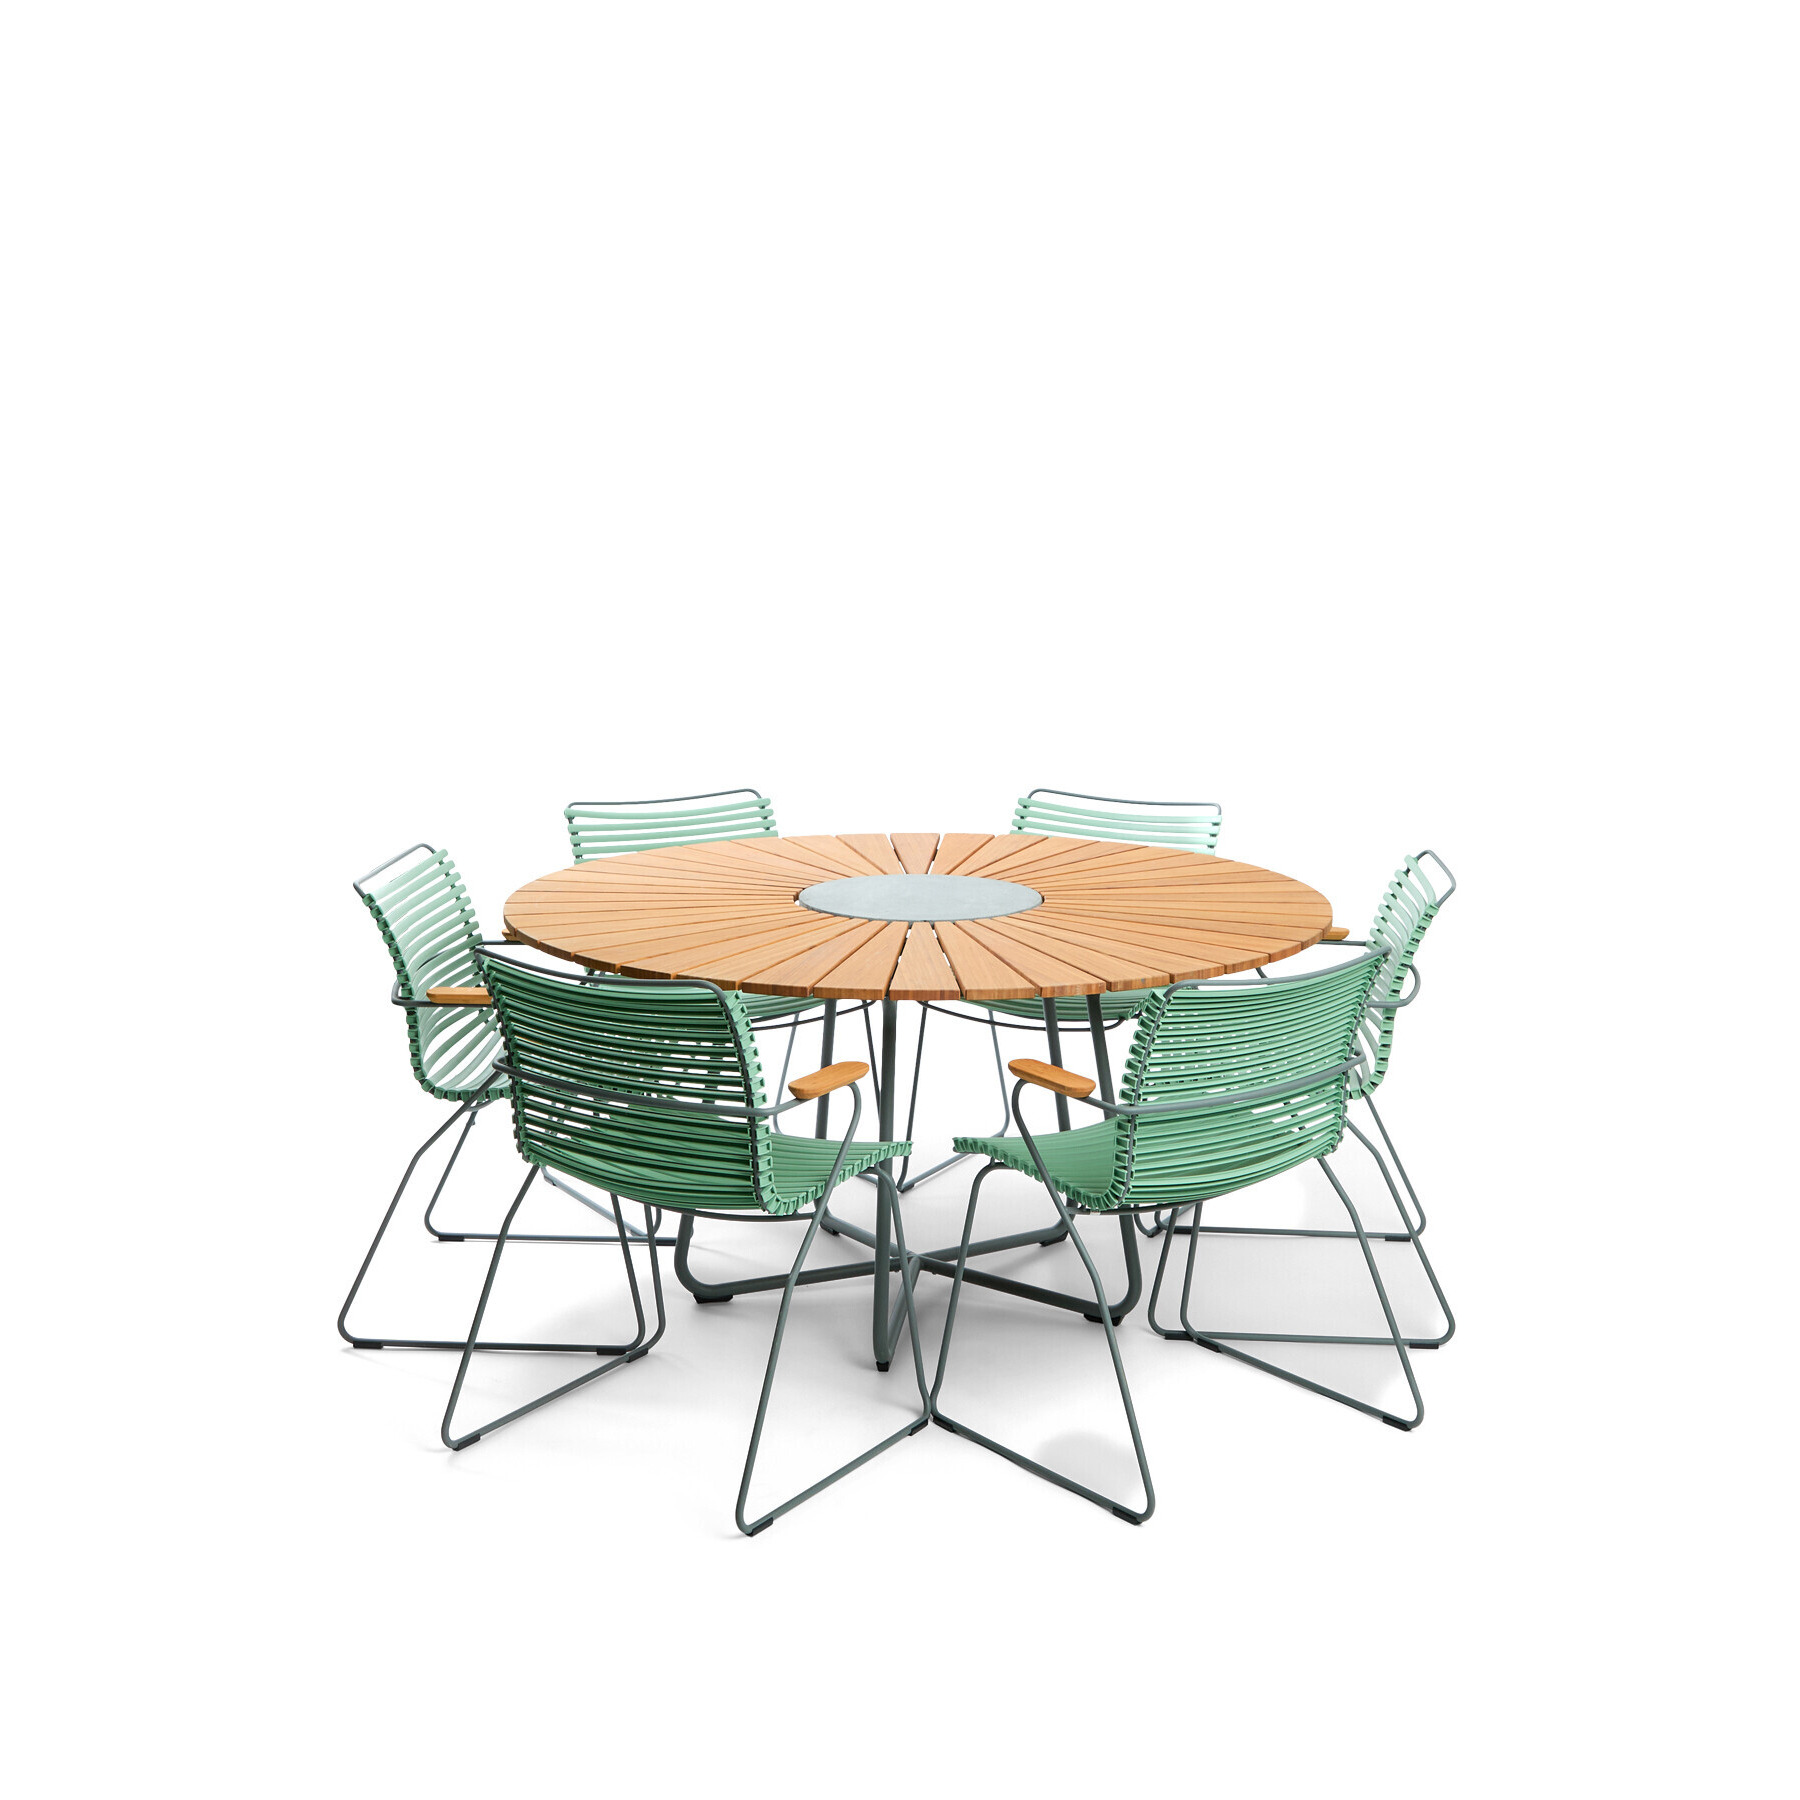 Houe Circle 6 Seat Dining Set with Dining Table and 6 Chairs Green - image 1